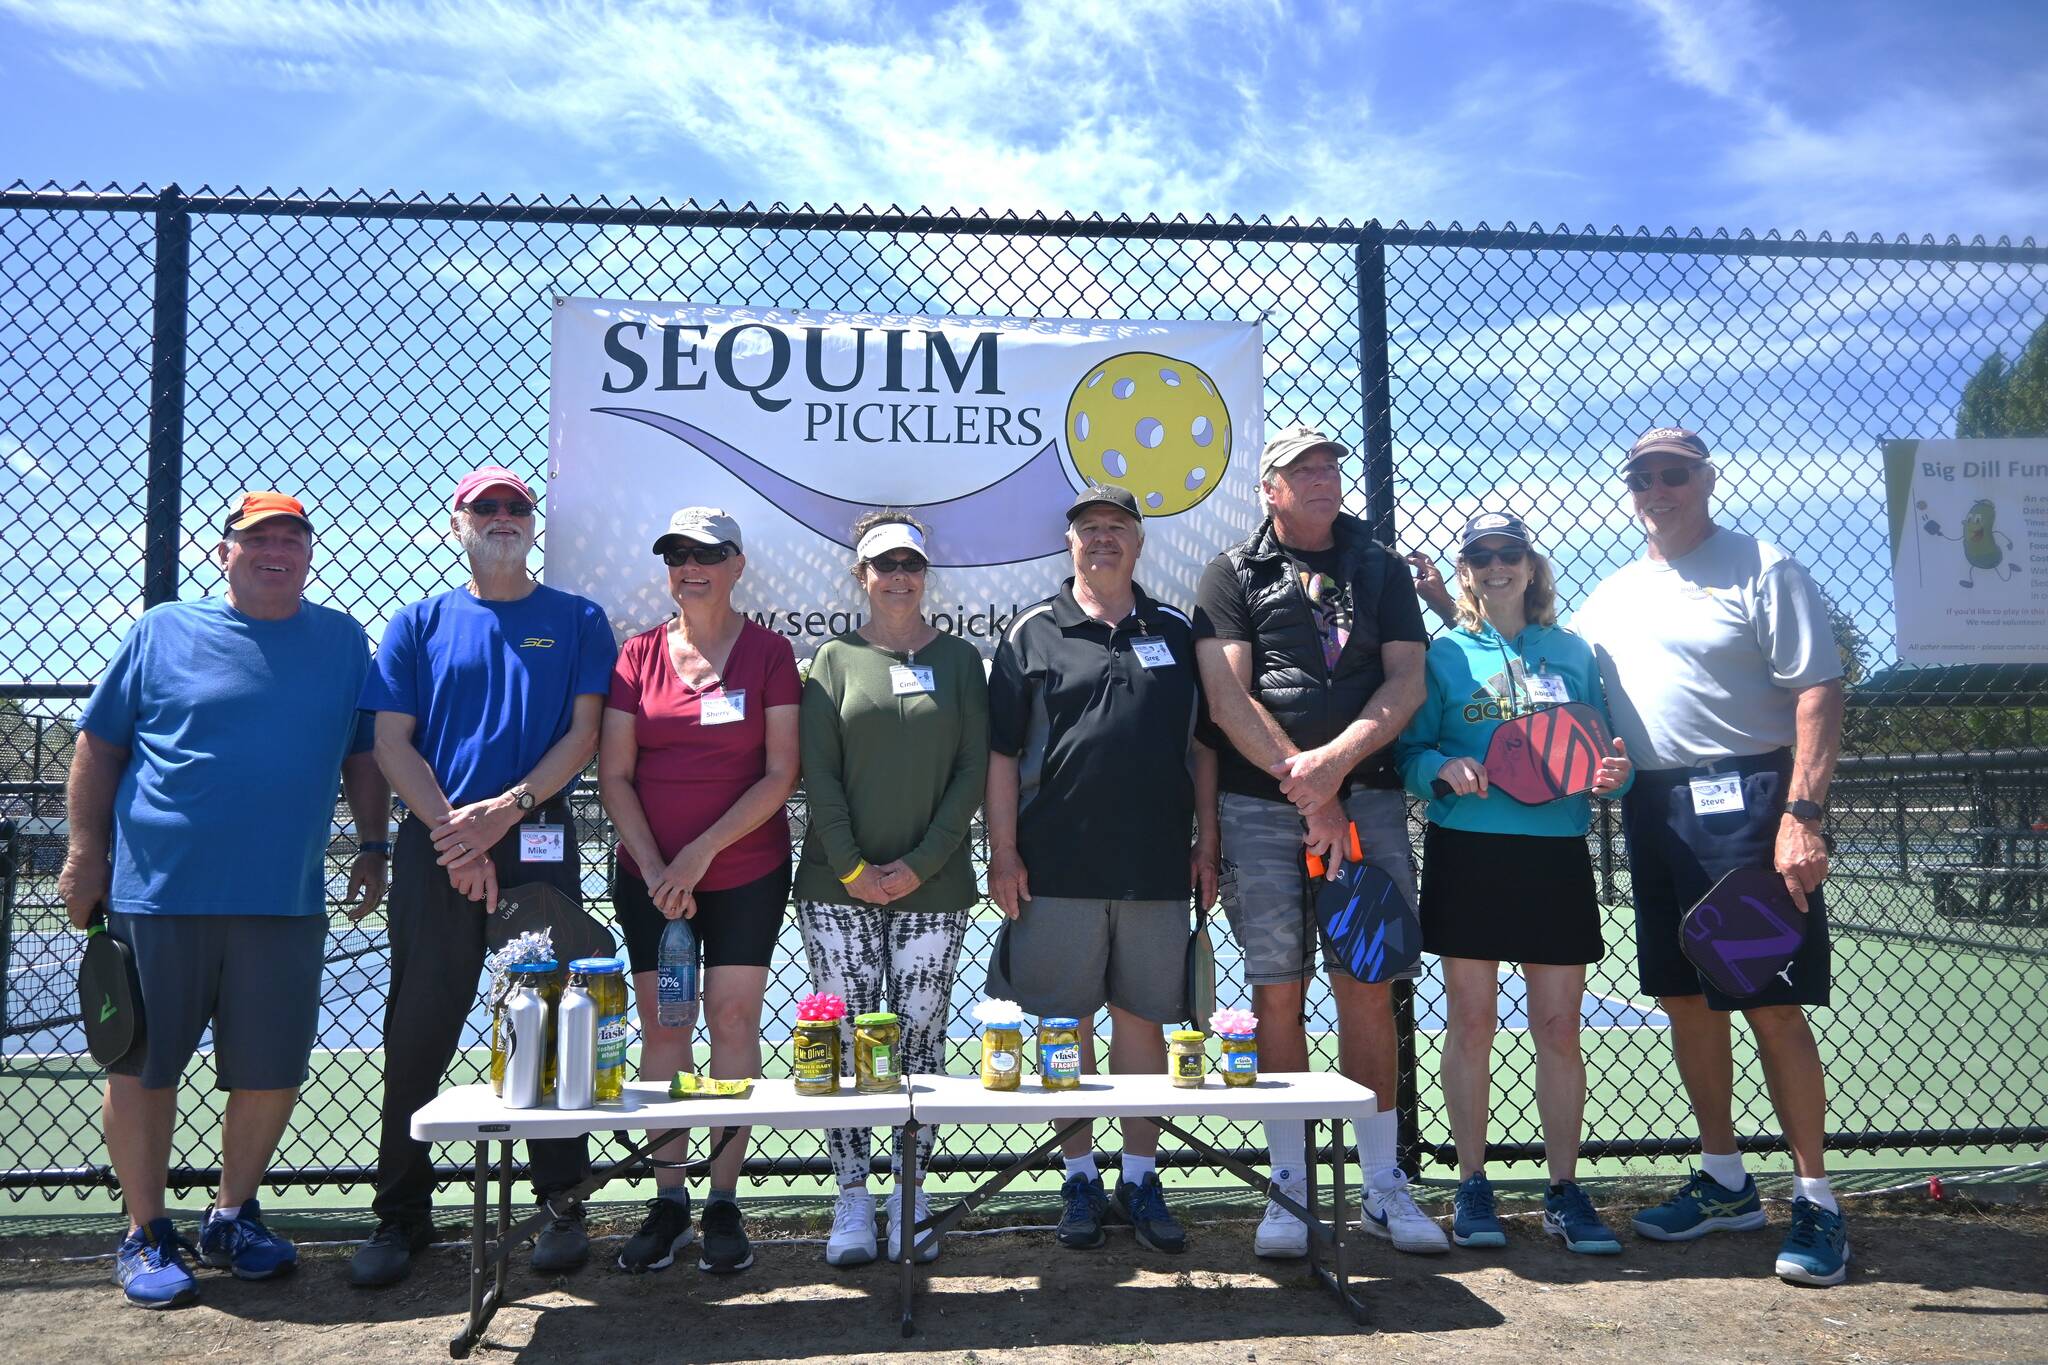 Sequim Gazette photo by Michael Dashiell / To placers in the Big Dill Fun Day tournament at Carrie Blake Community Park on May 20 include, from left: Kevin Jenks and Mike Richer, first place; Sherri Gyovai and Cindi Pettit, second place; Greg Cooper and Tom Flack, third place, and Abigail Berg and Steve Burkett, fourth place.